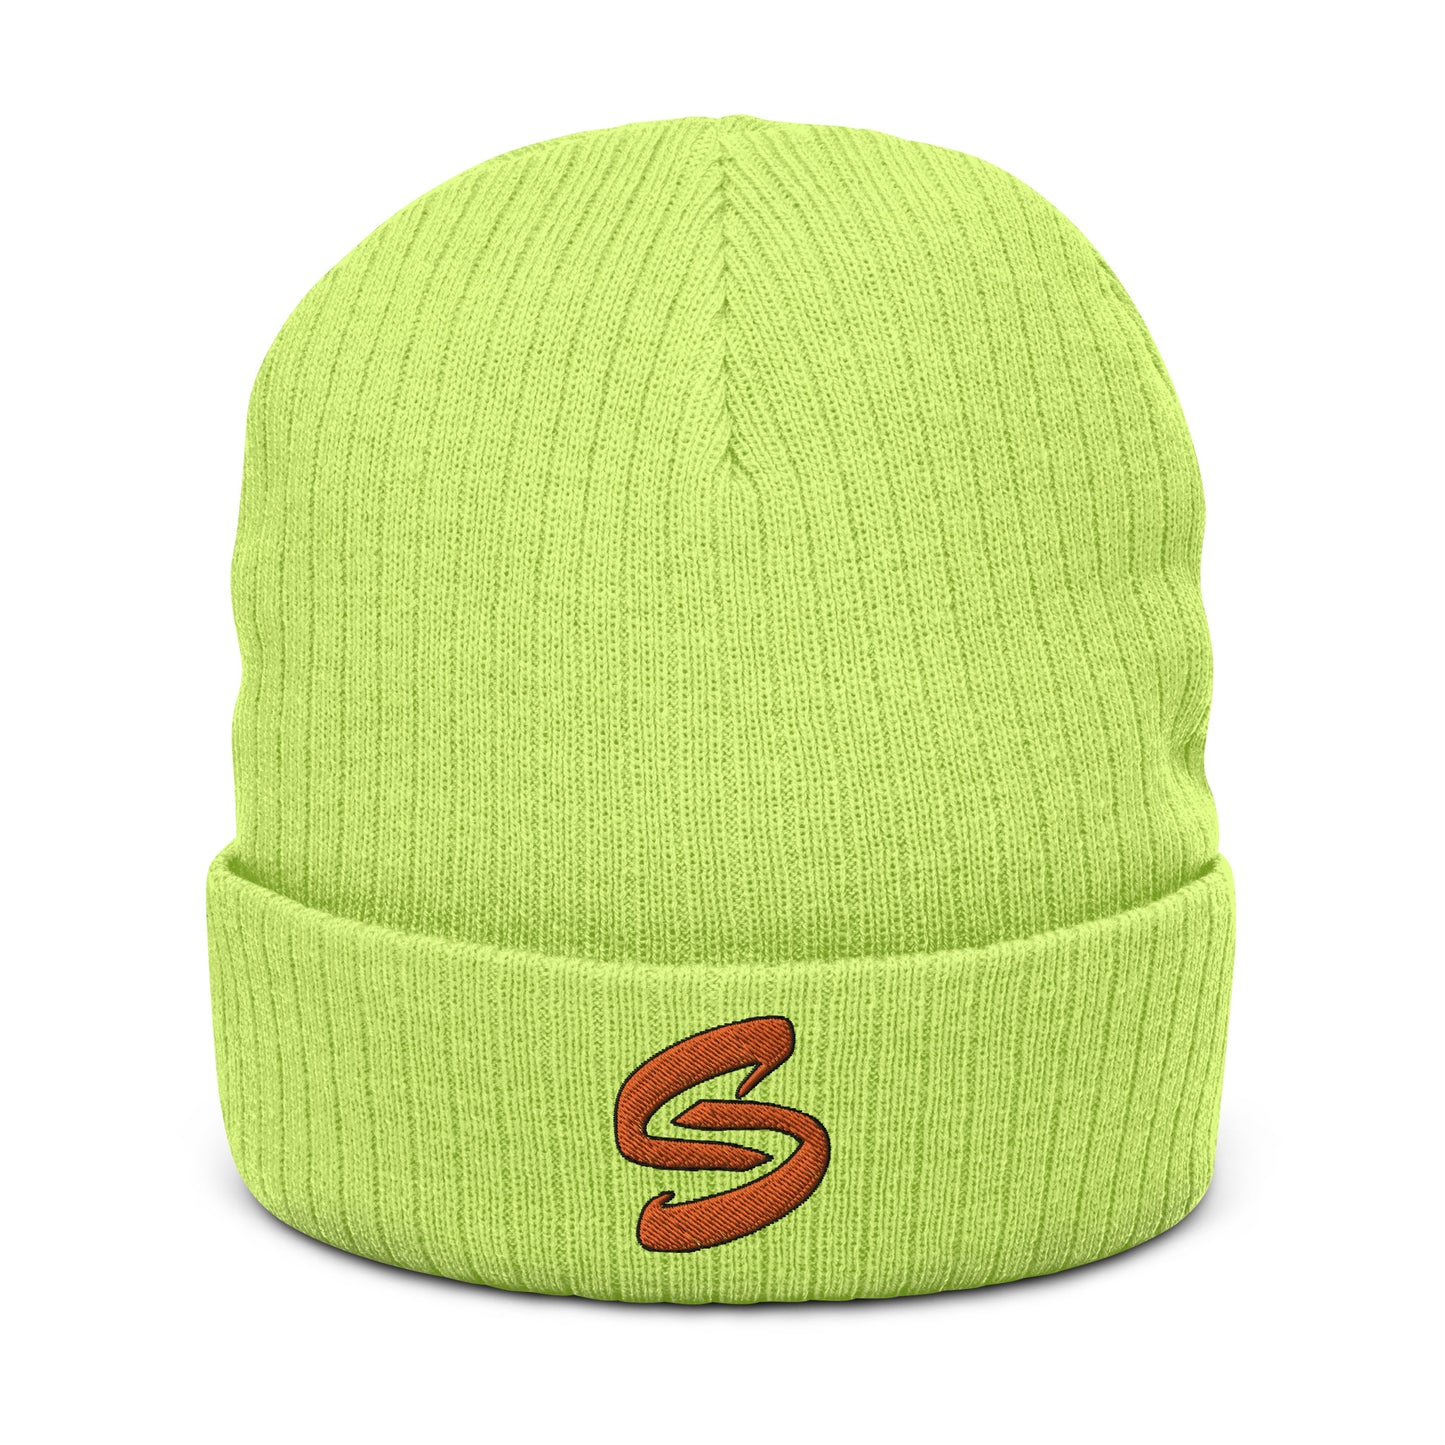 Ribbed knit beanie in recycled polyester and acrylic blend, double-layered with a cuffed design. Stylish, warm, and versatile accessory for all head sizes. Handcrafted on demand to reduce overproduction and promote sustainable choices. 8.27 inches (21 cm) in length. Beanie in High "Acid Green" a Visibility Green (Hi-Viz) with embroidered Orange Send Coalition S logo